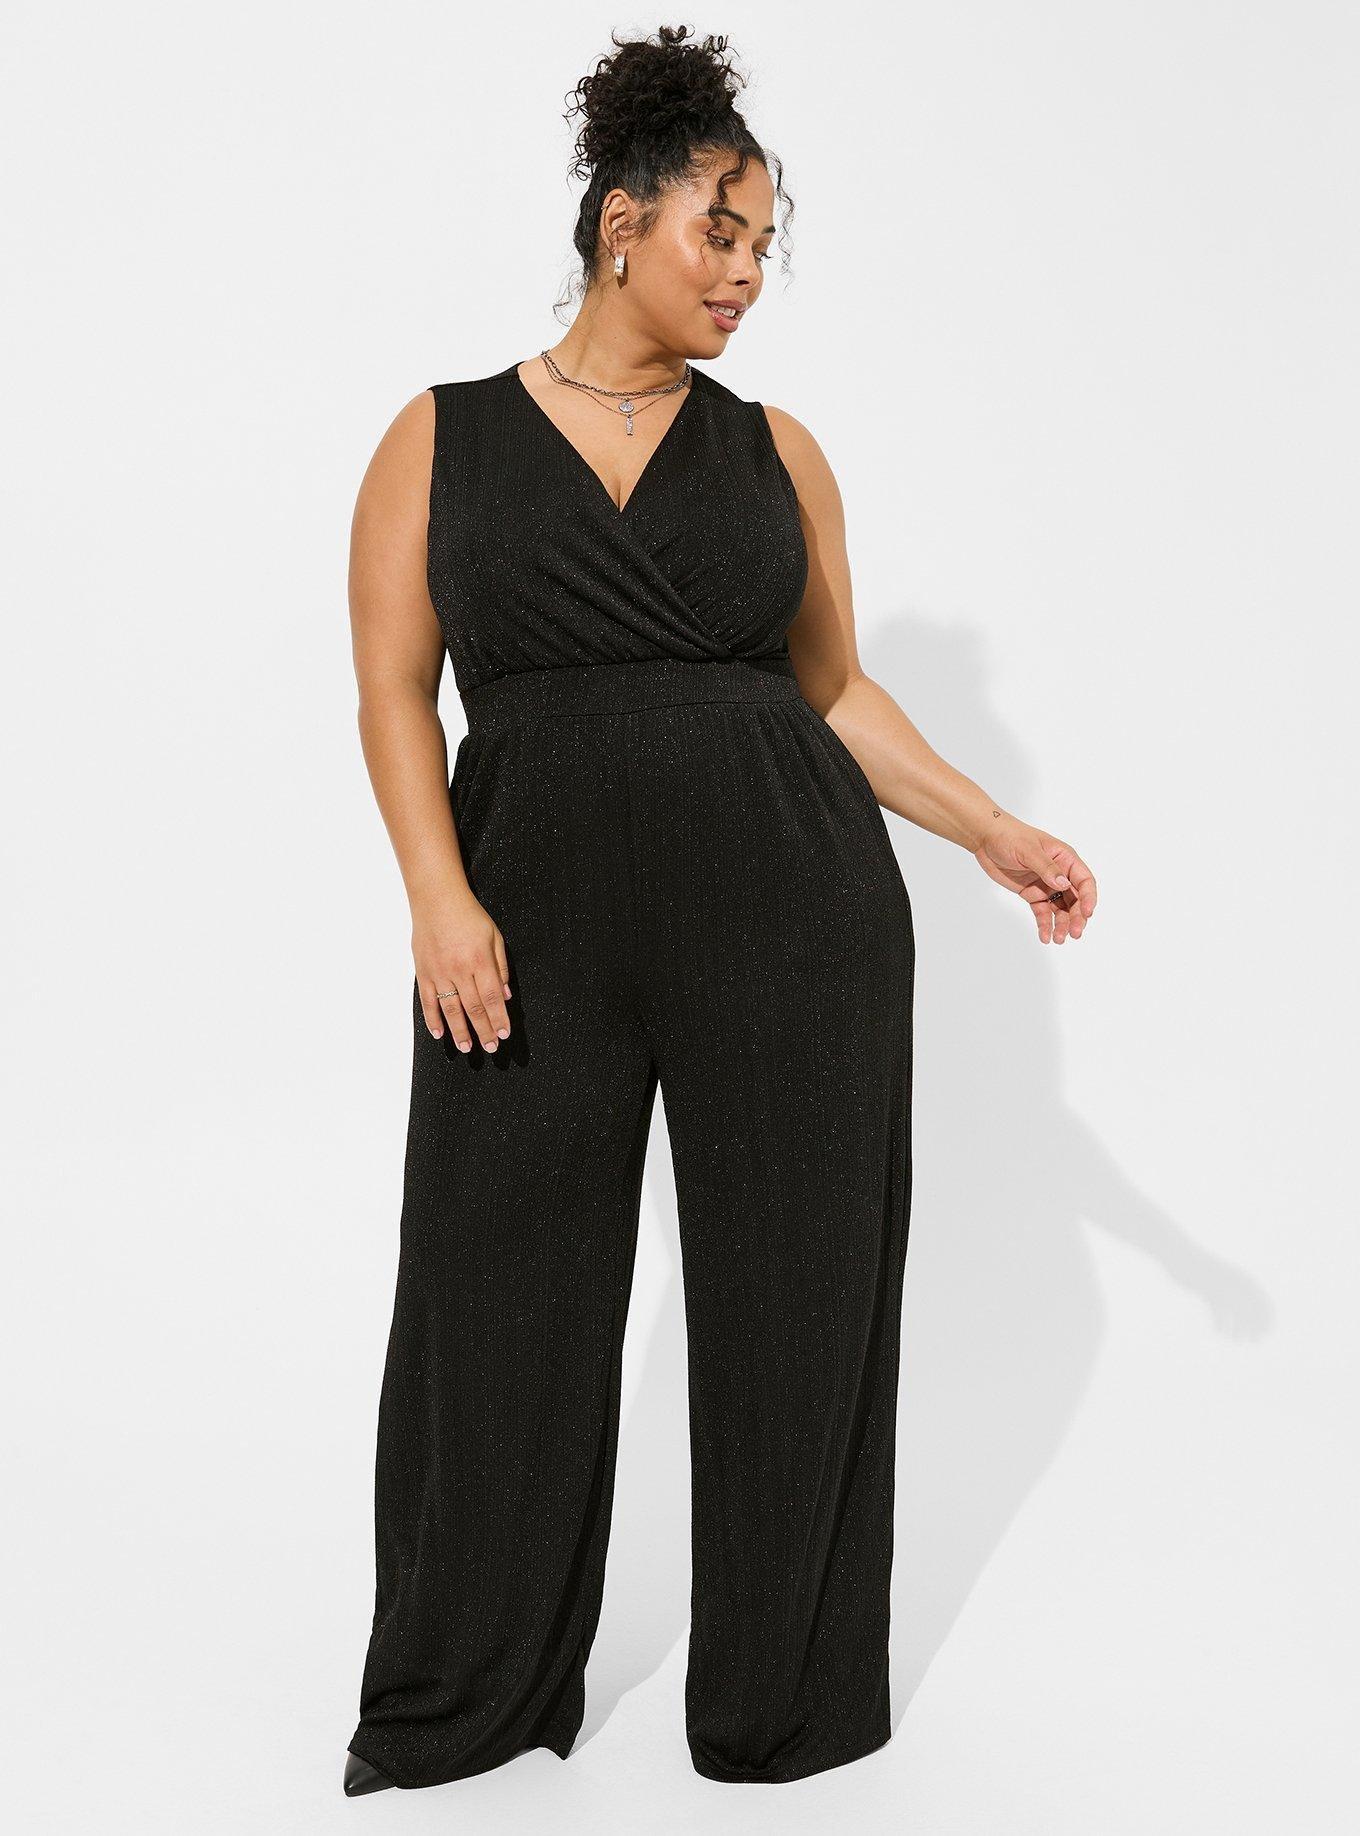 U.S. plus-size retailer Torrid to launch first store in Canada Sept. 1